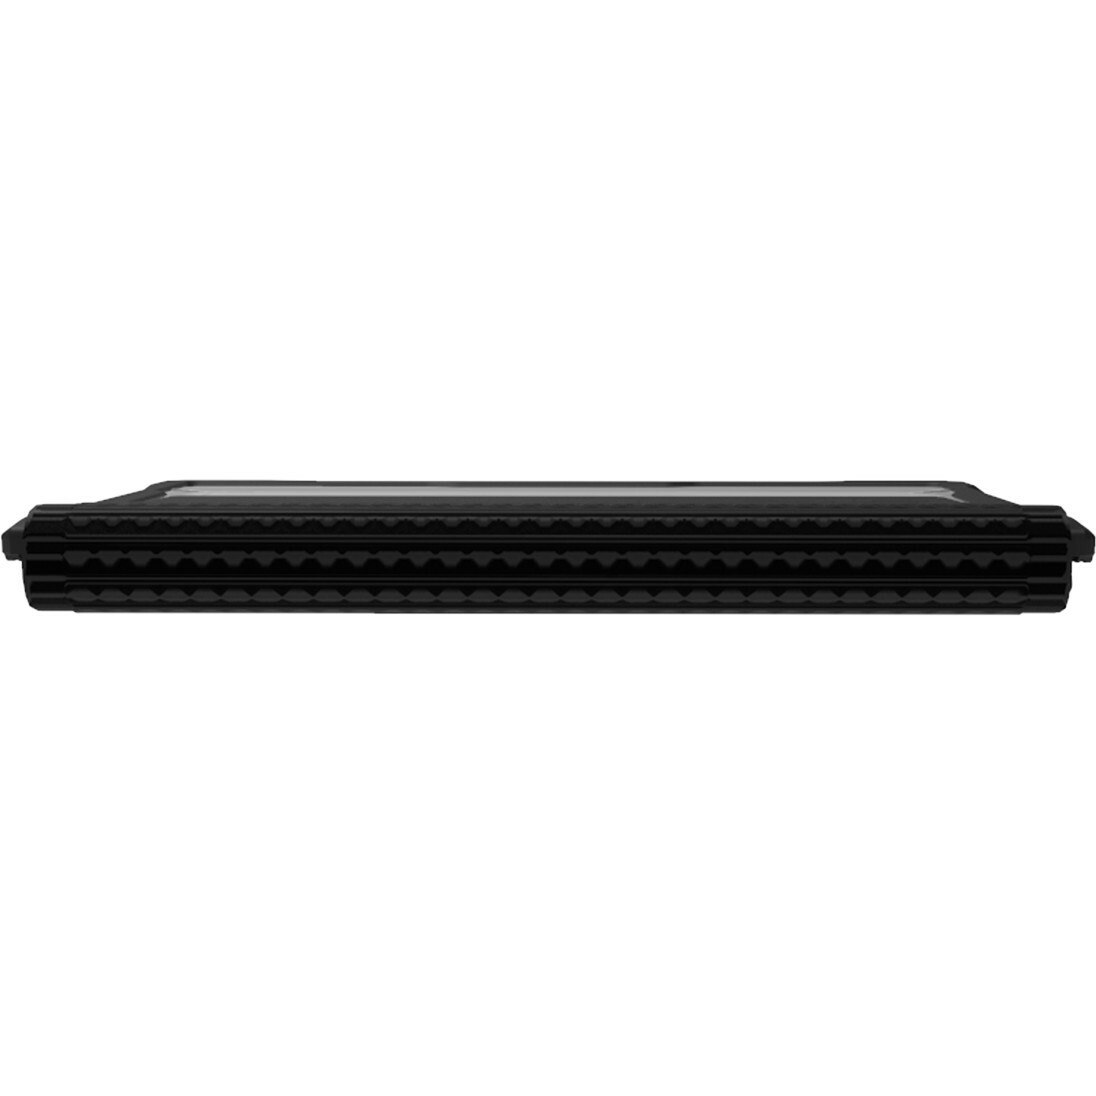 Extreme Shell-L for Dell 3100/3110 Chromebook 2:1 Convertible 11.6" (Black/Clear)